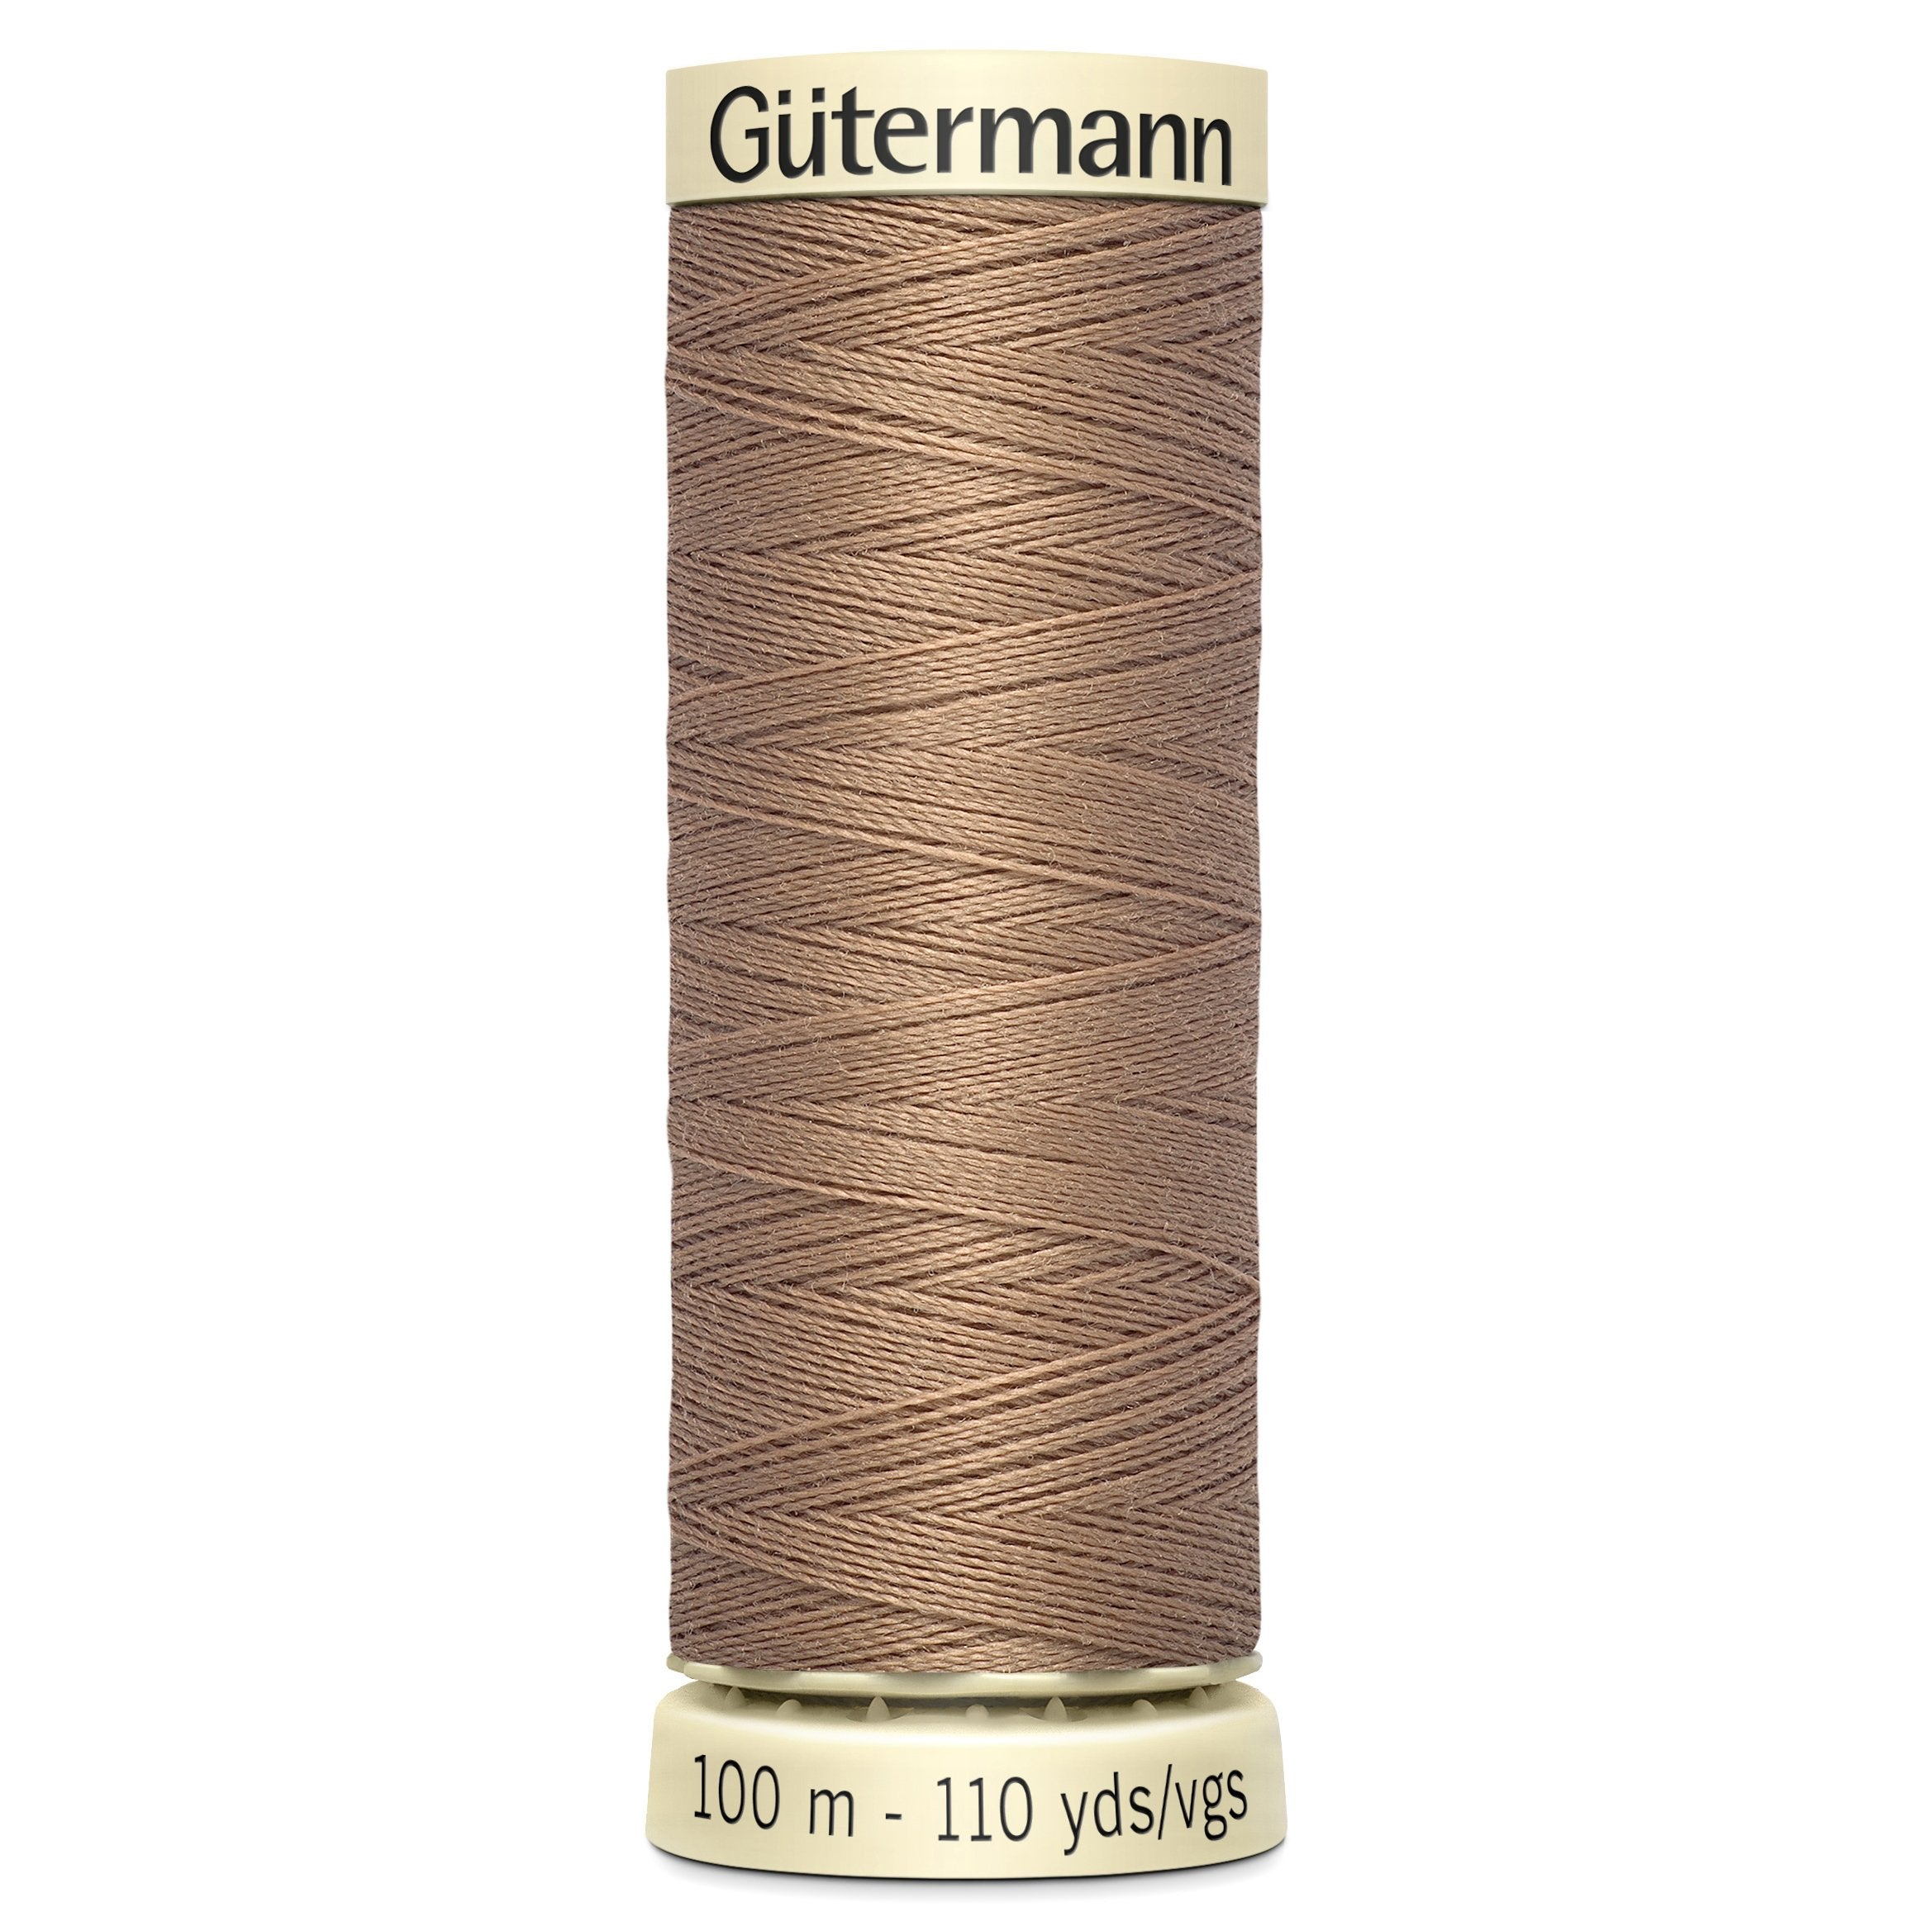 Gutermann Sew-All Polyester Sewing Thread - Colour: #139 Sienna from Jaycotts Sewing Supplies